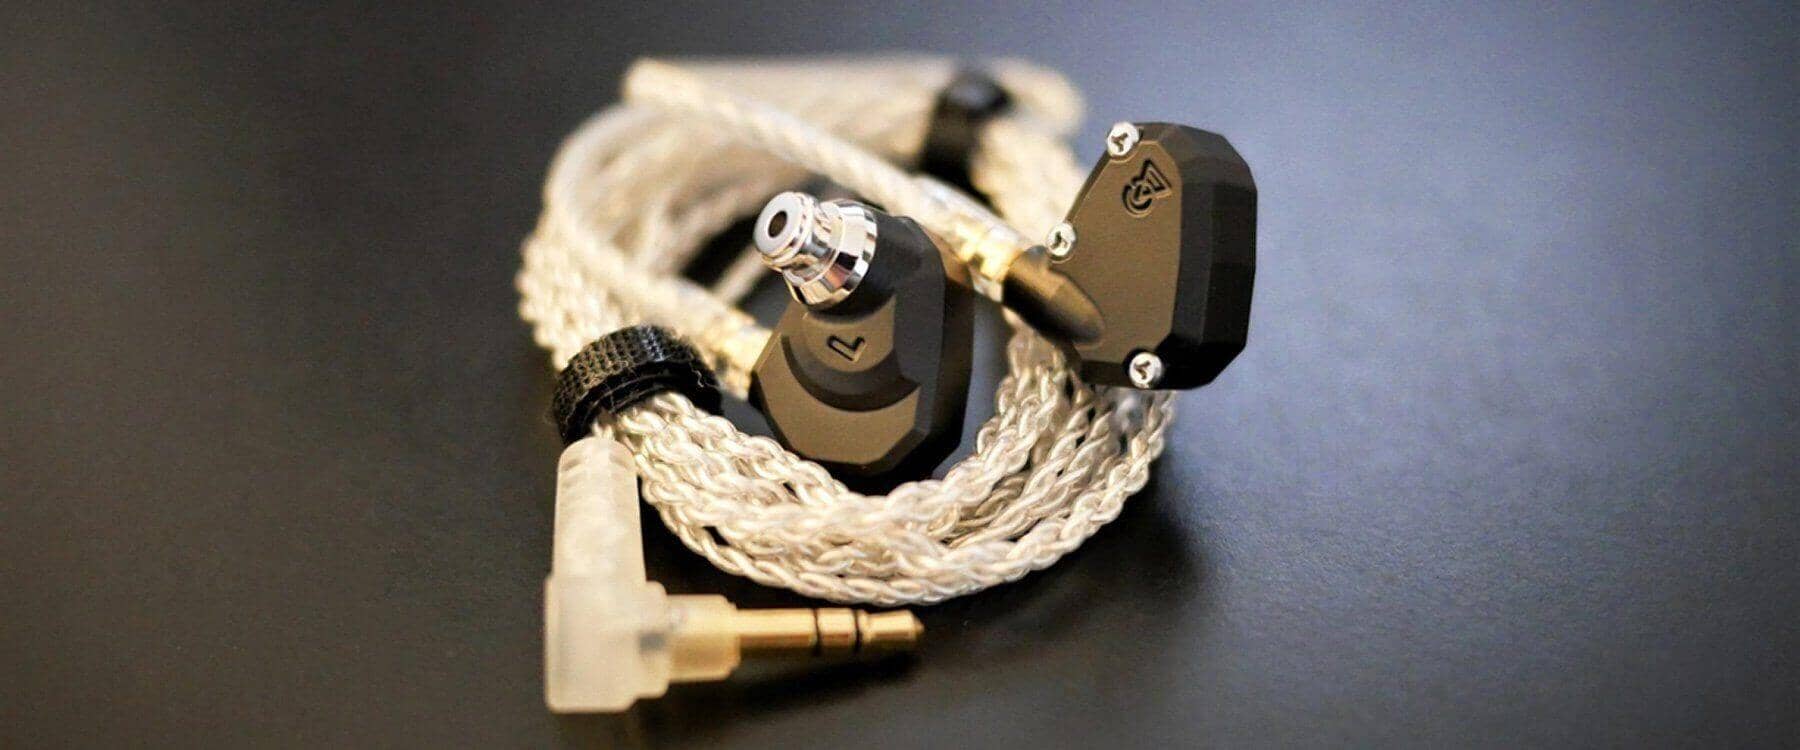 Campfire Audio Orion - In Ear Monitors - Review – Headphones.com